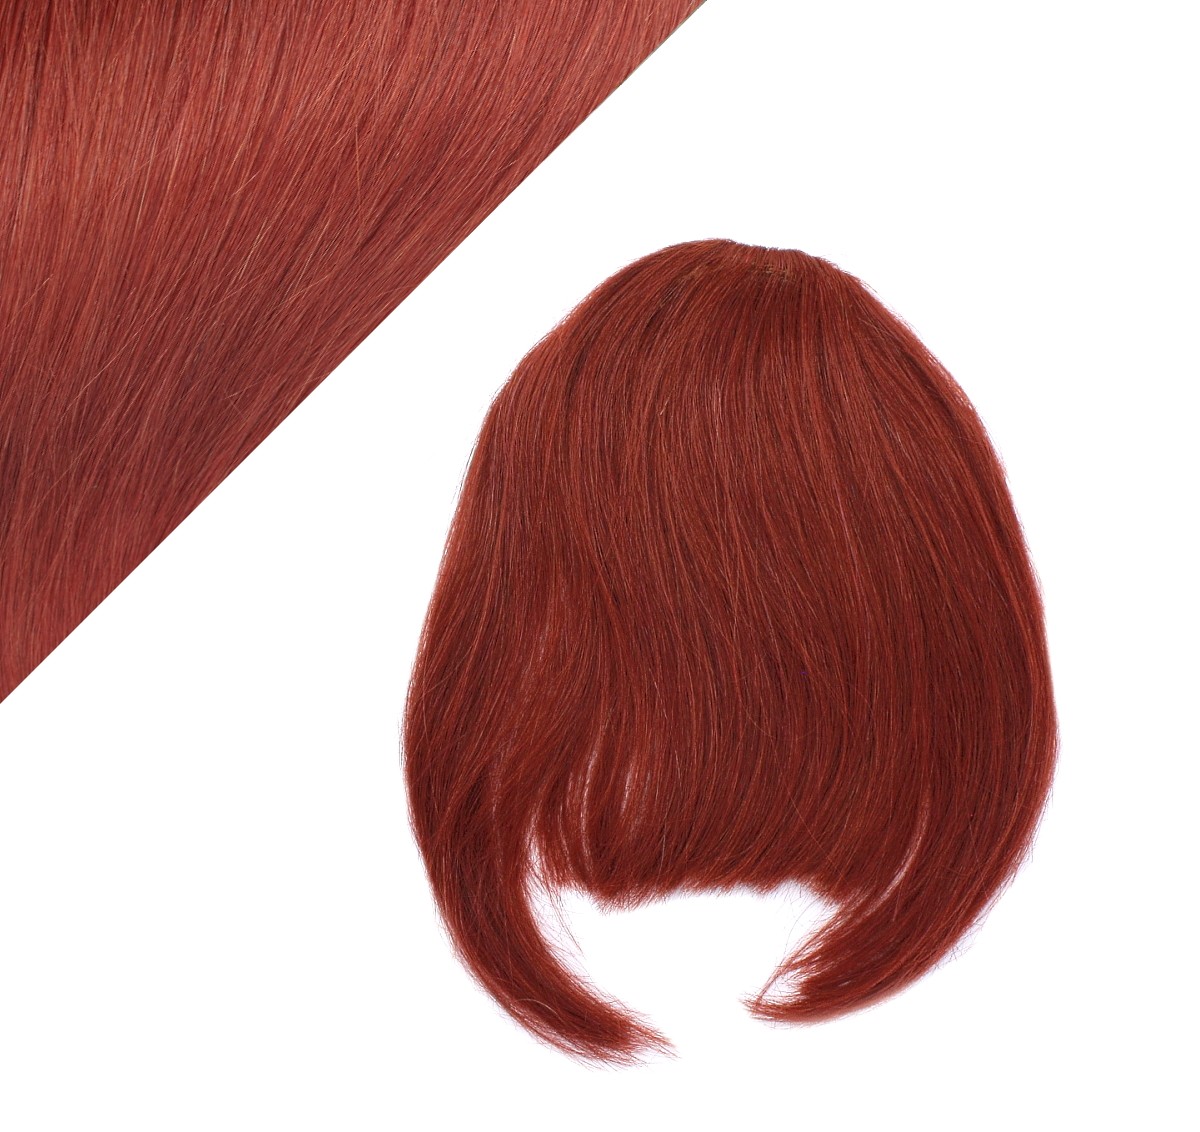 Clip in bang/fringe human hair remy – copper red - Hair Extensions Hotstyle